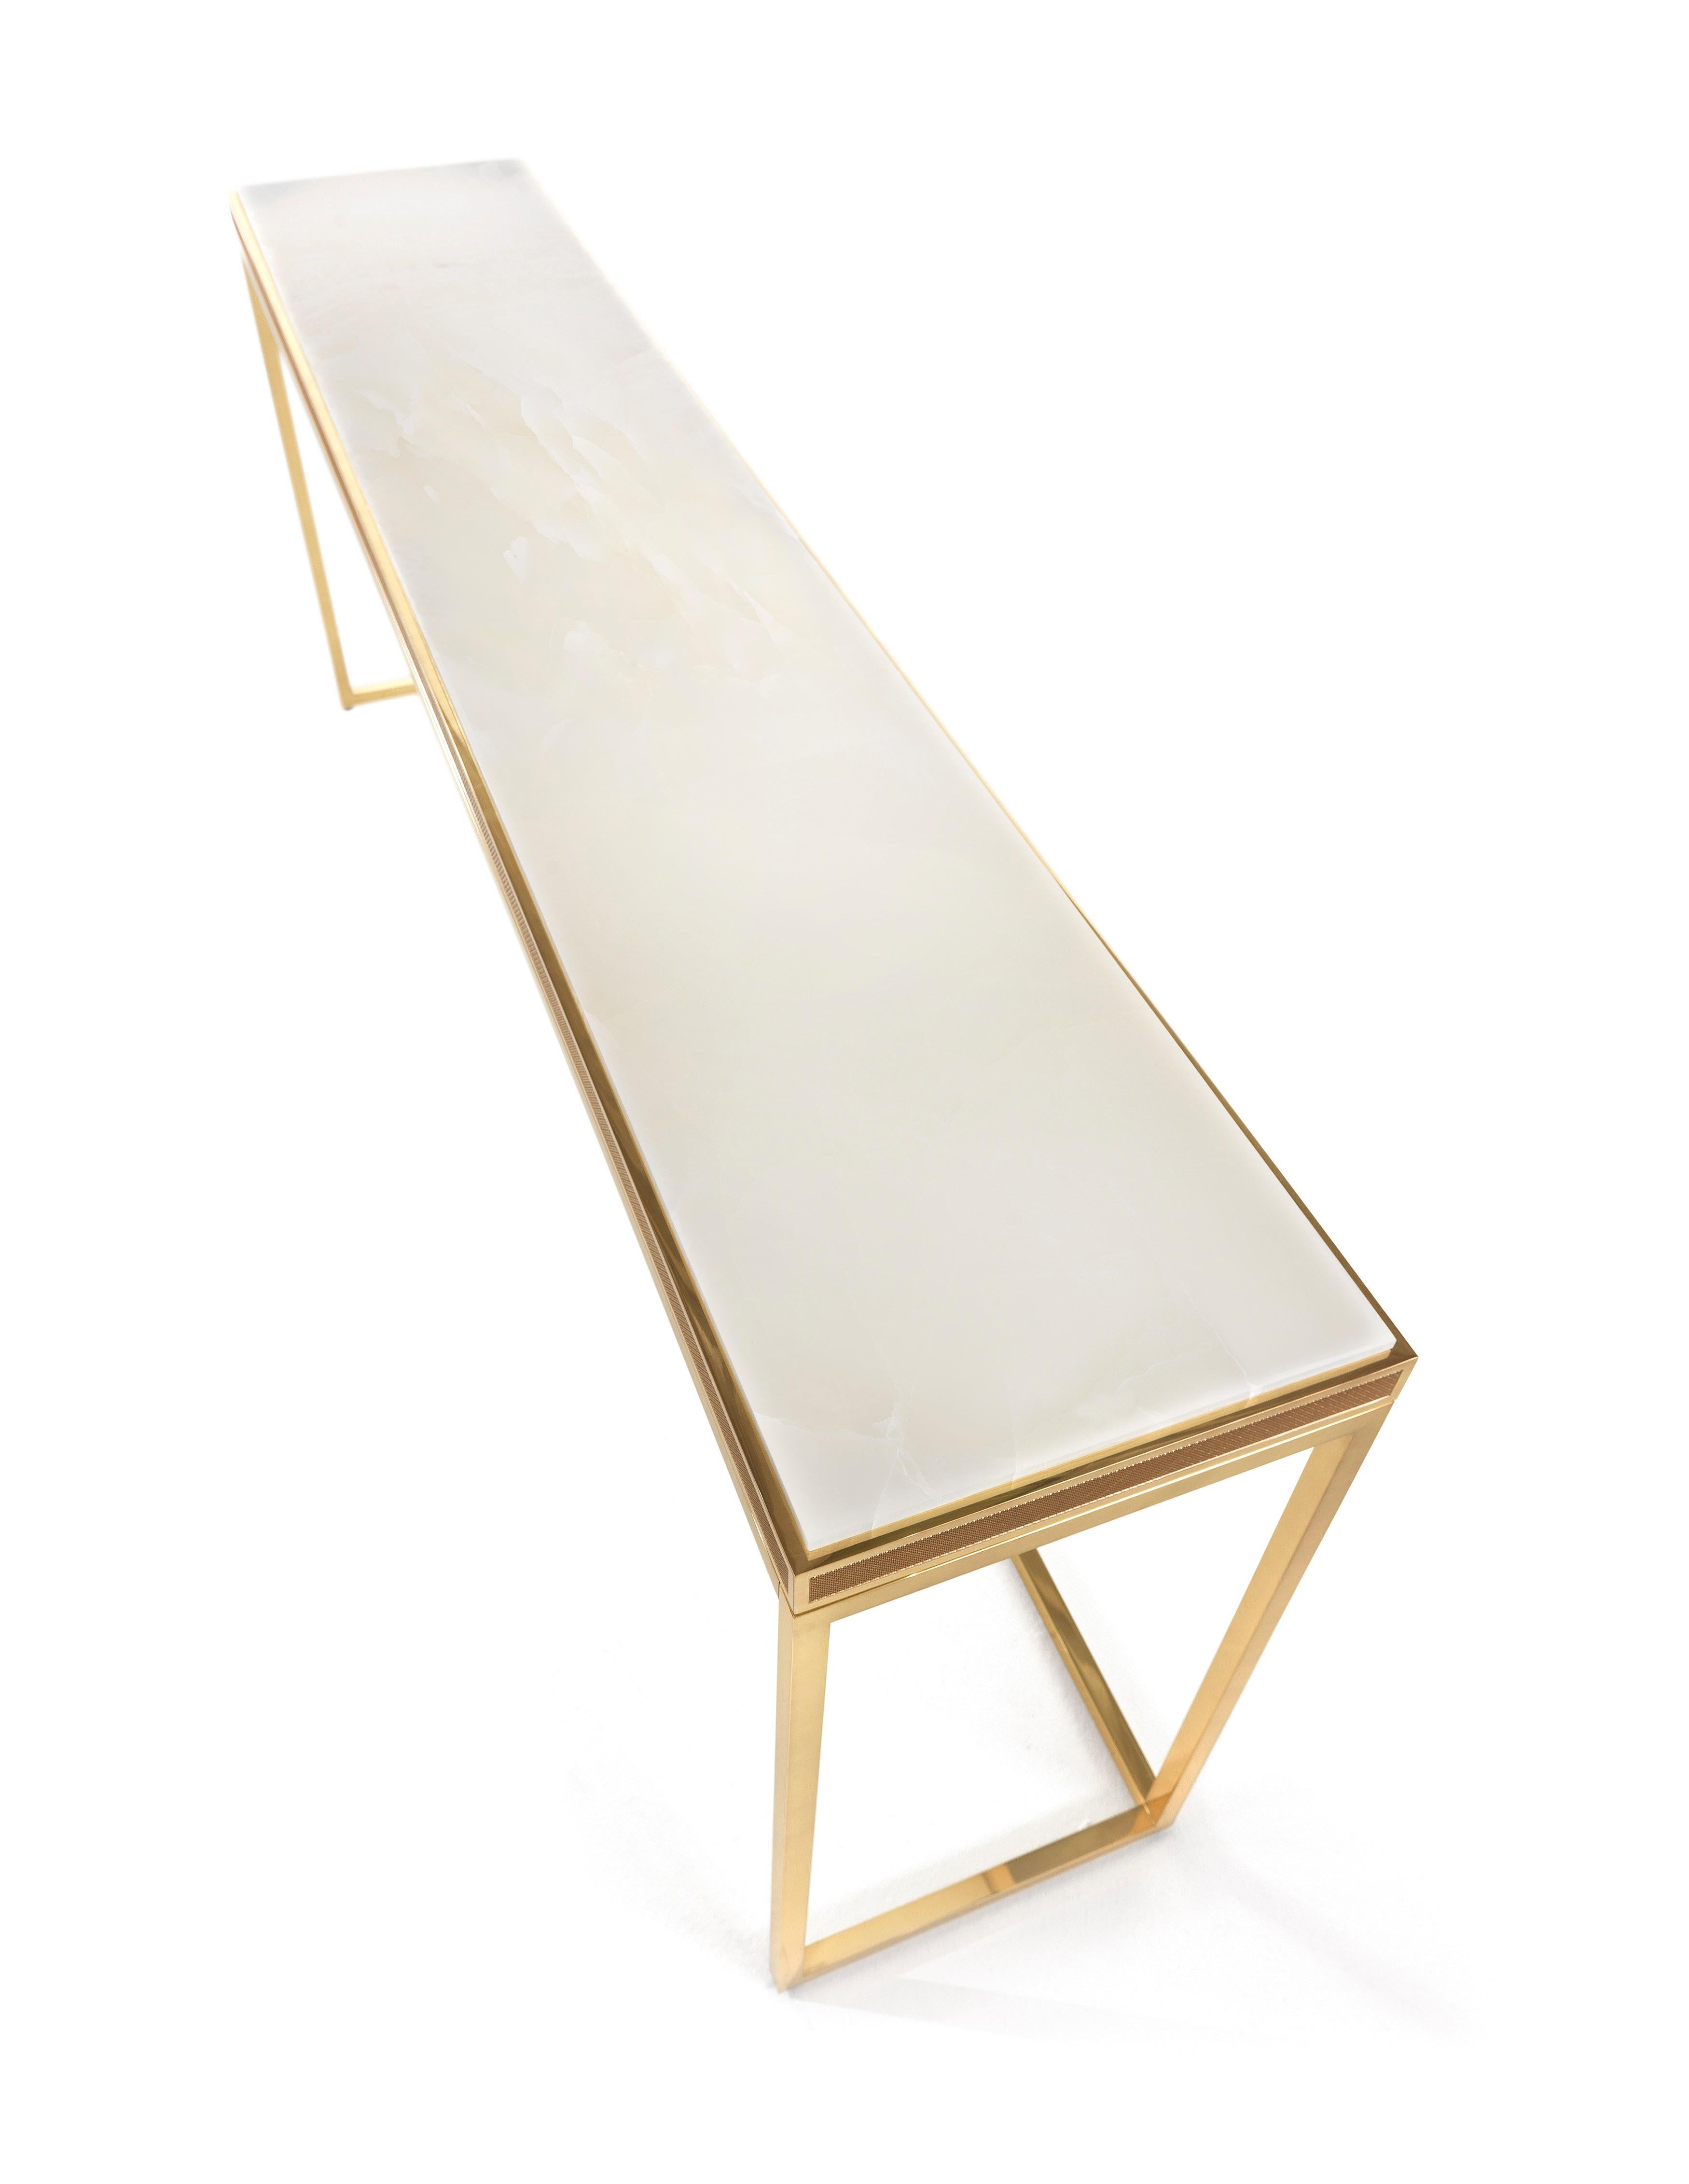 Elegant and refined, with its simple and linear shapes, Dedalus console features a brass structure with a glossy finish, an engraved frame and a marble top. Inspired by the art deco style, thanks to its versatility it adapts perfectly to classic or